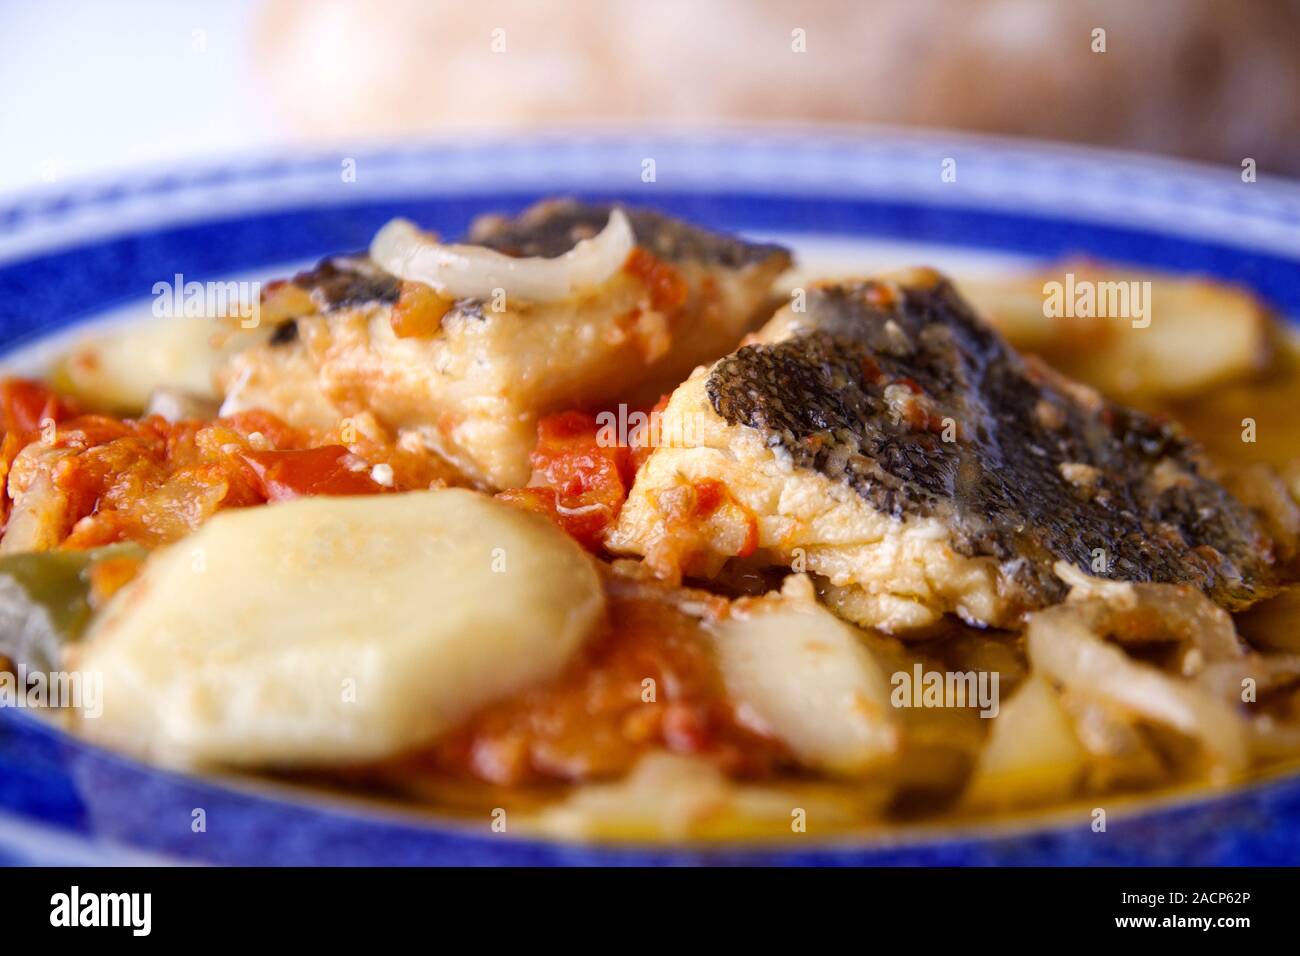 meal of cod fish and potatoes Stock Photo